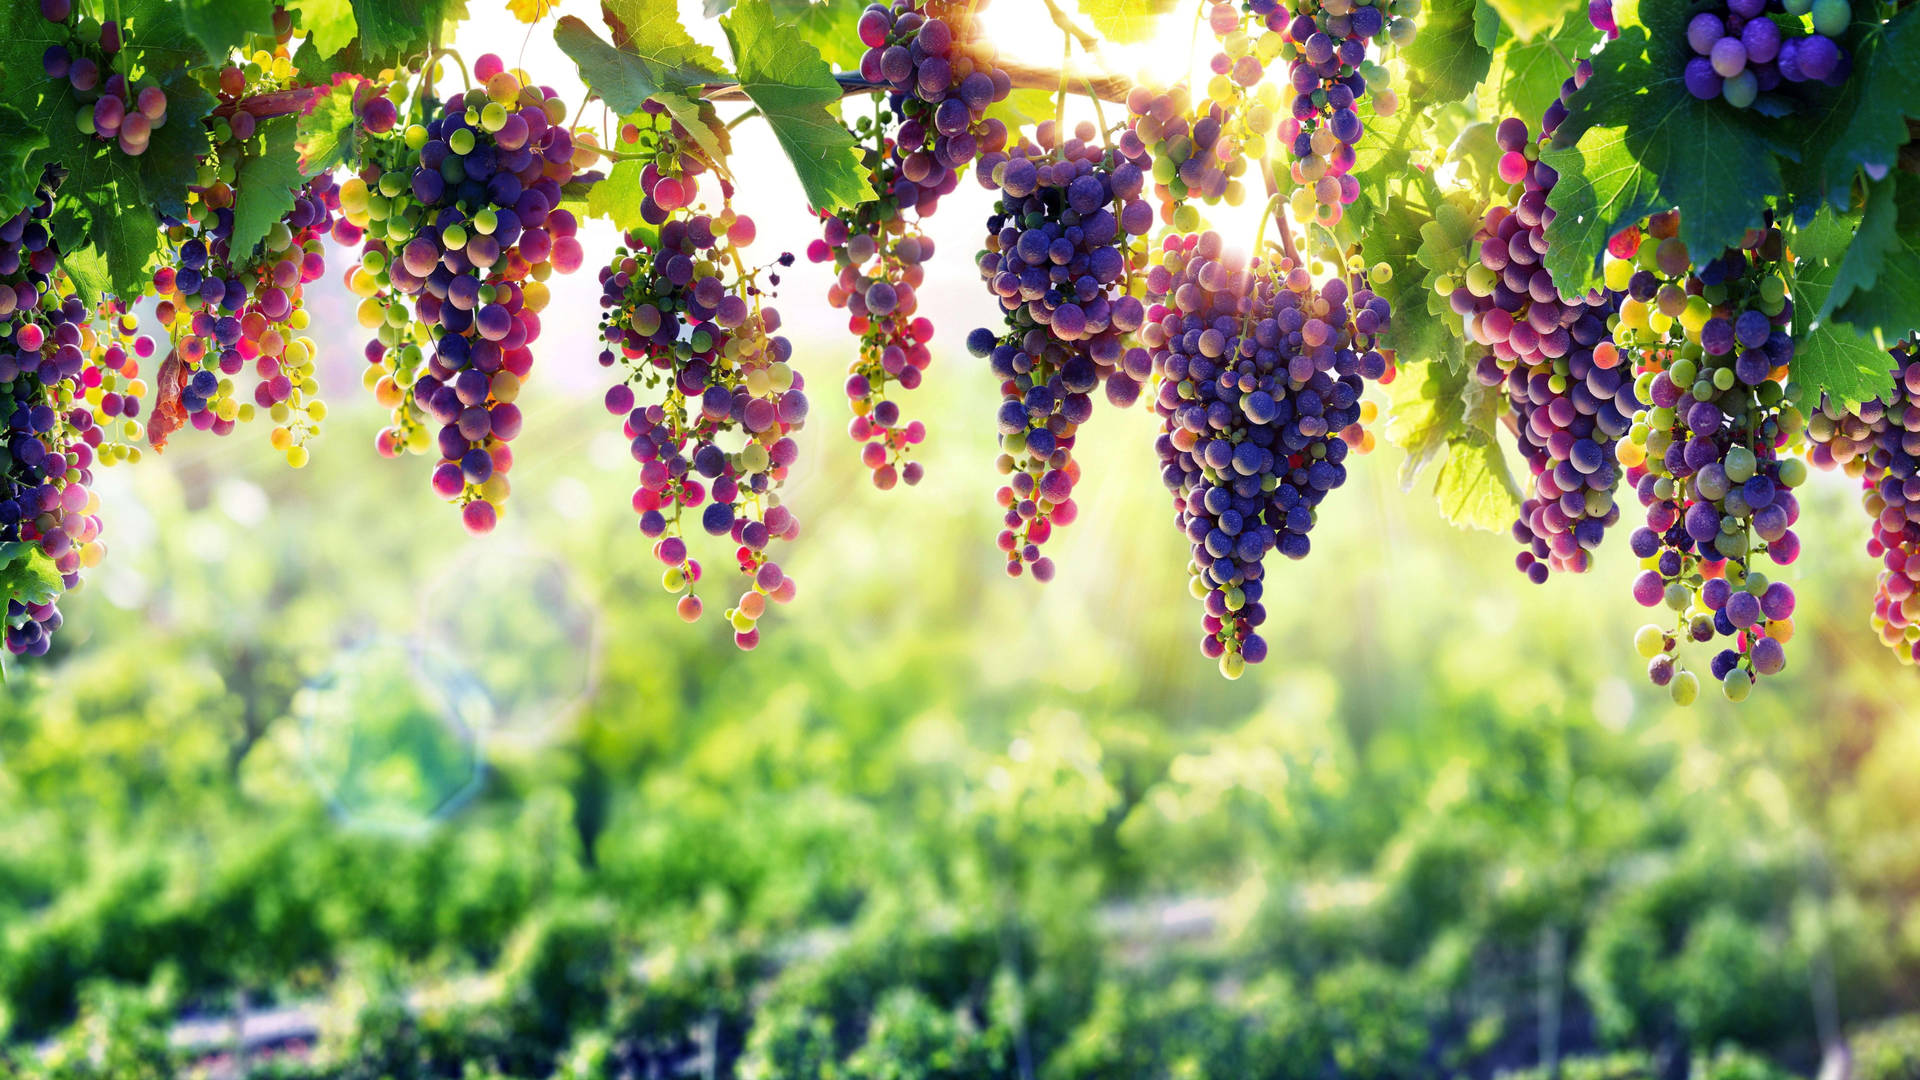 8k Ultra Hd Purple Grapes Cluster Background